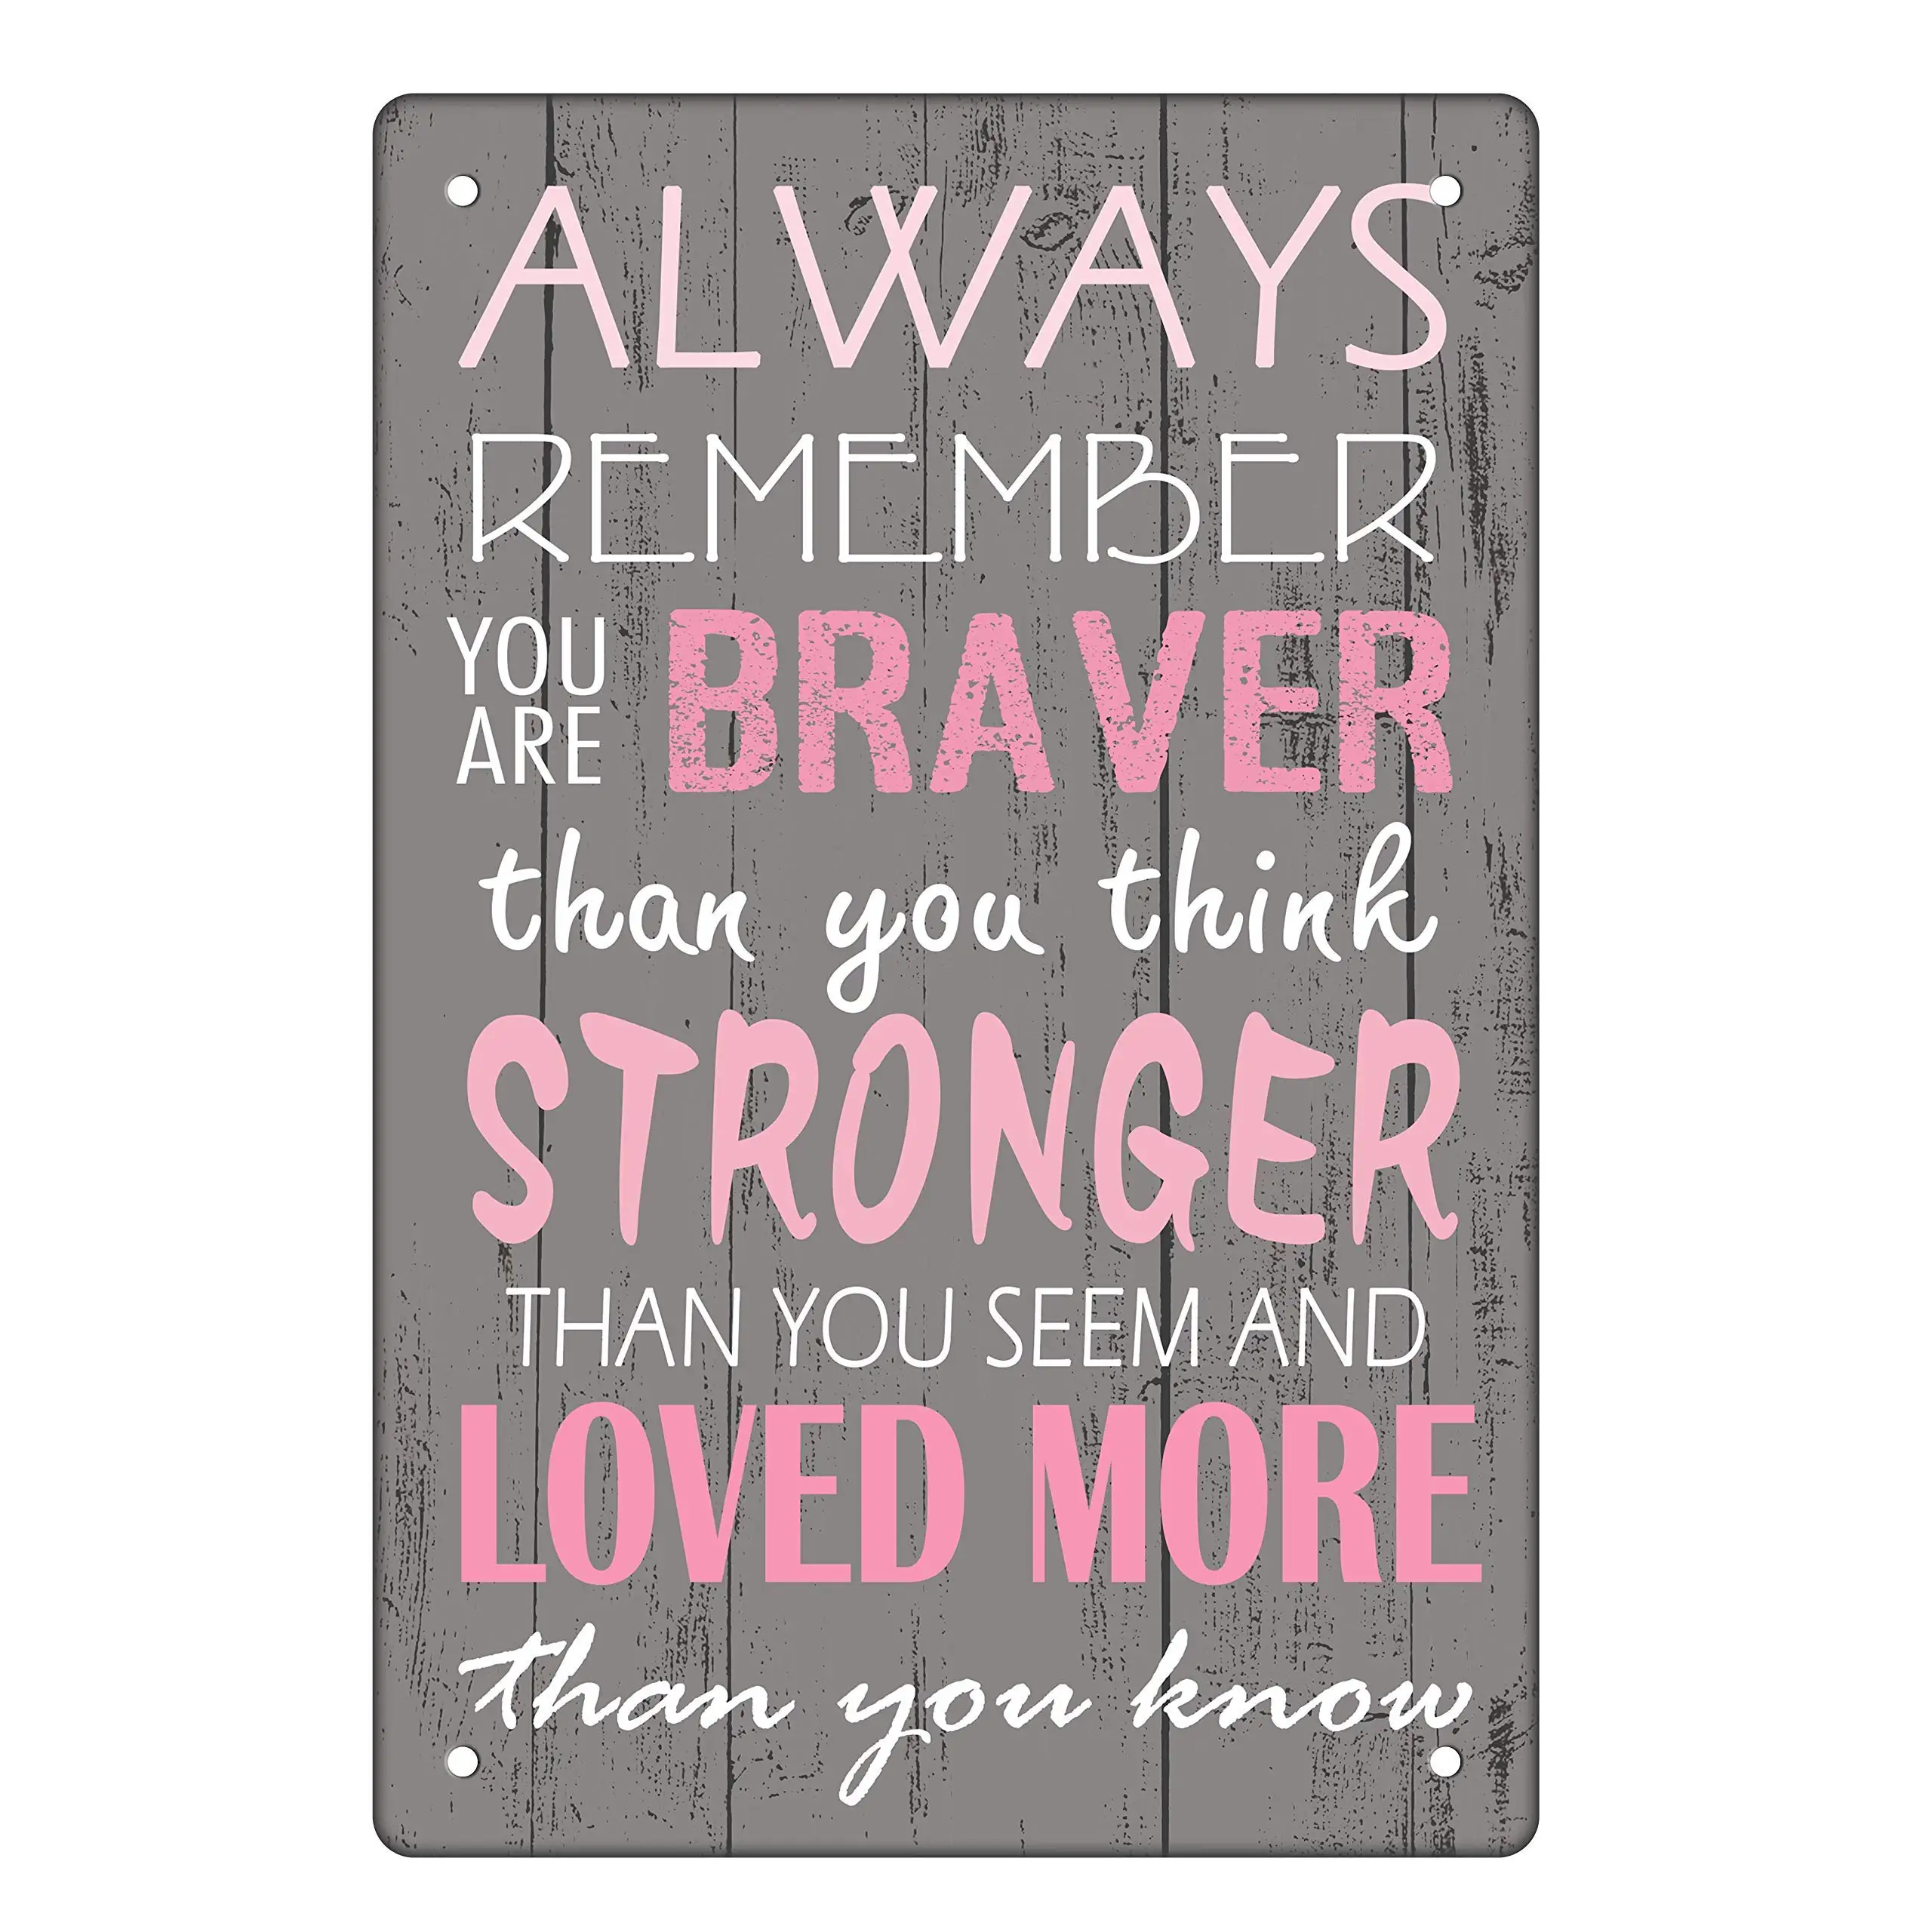 

Vintage Tin Sign Poster Art Decor Always Remember You are Braver Than You Believe Bar Restaurant Home Outdoor Wall Decoration